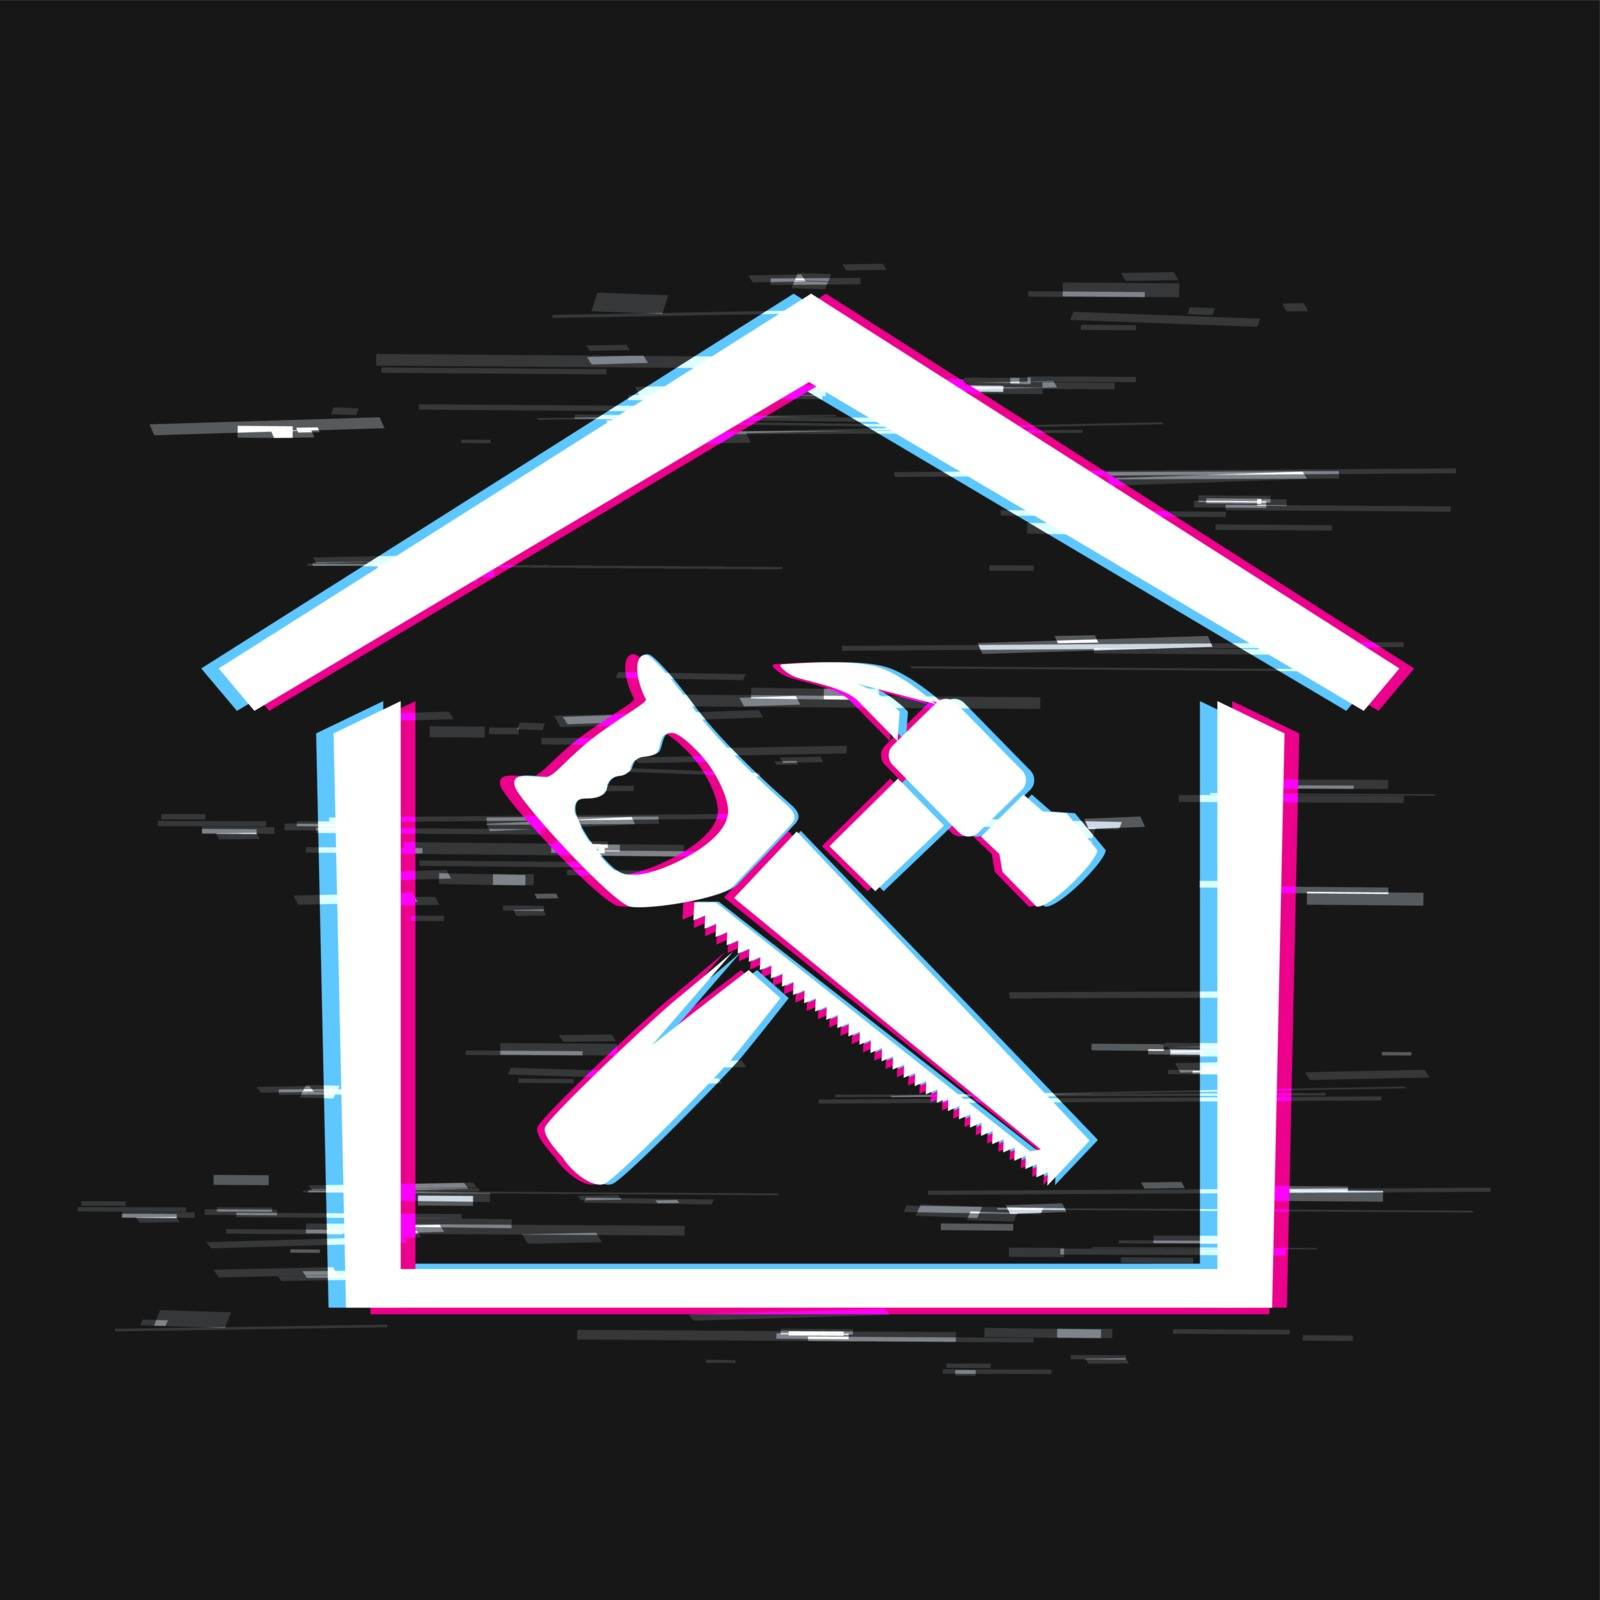 Home repair glitch effect icon saw and hammer on dark background. House service symbol on black backdrop